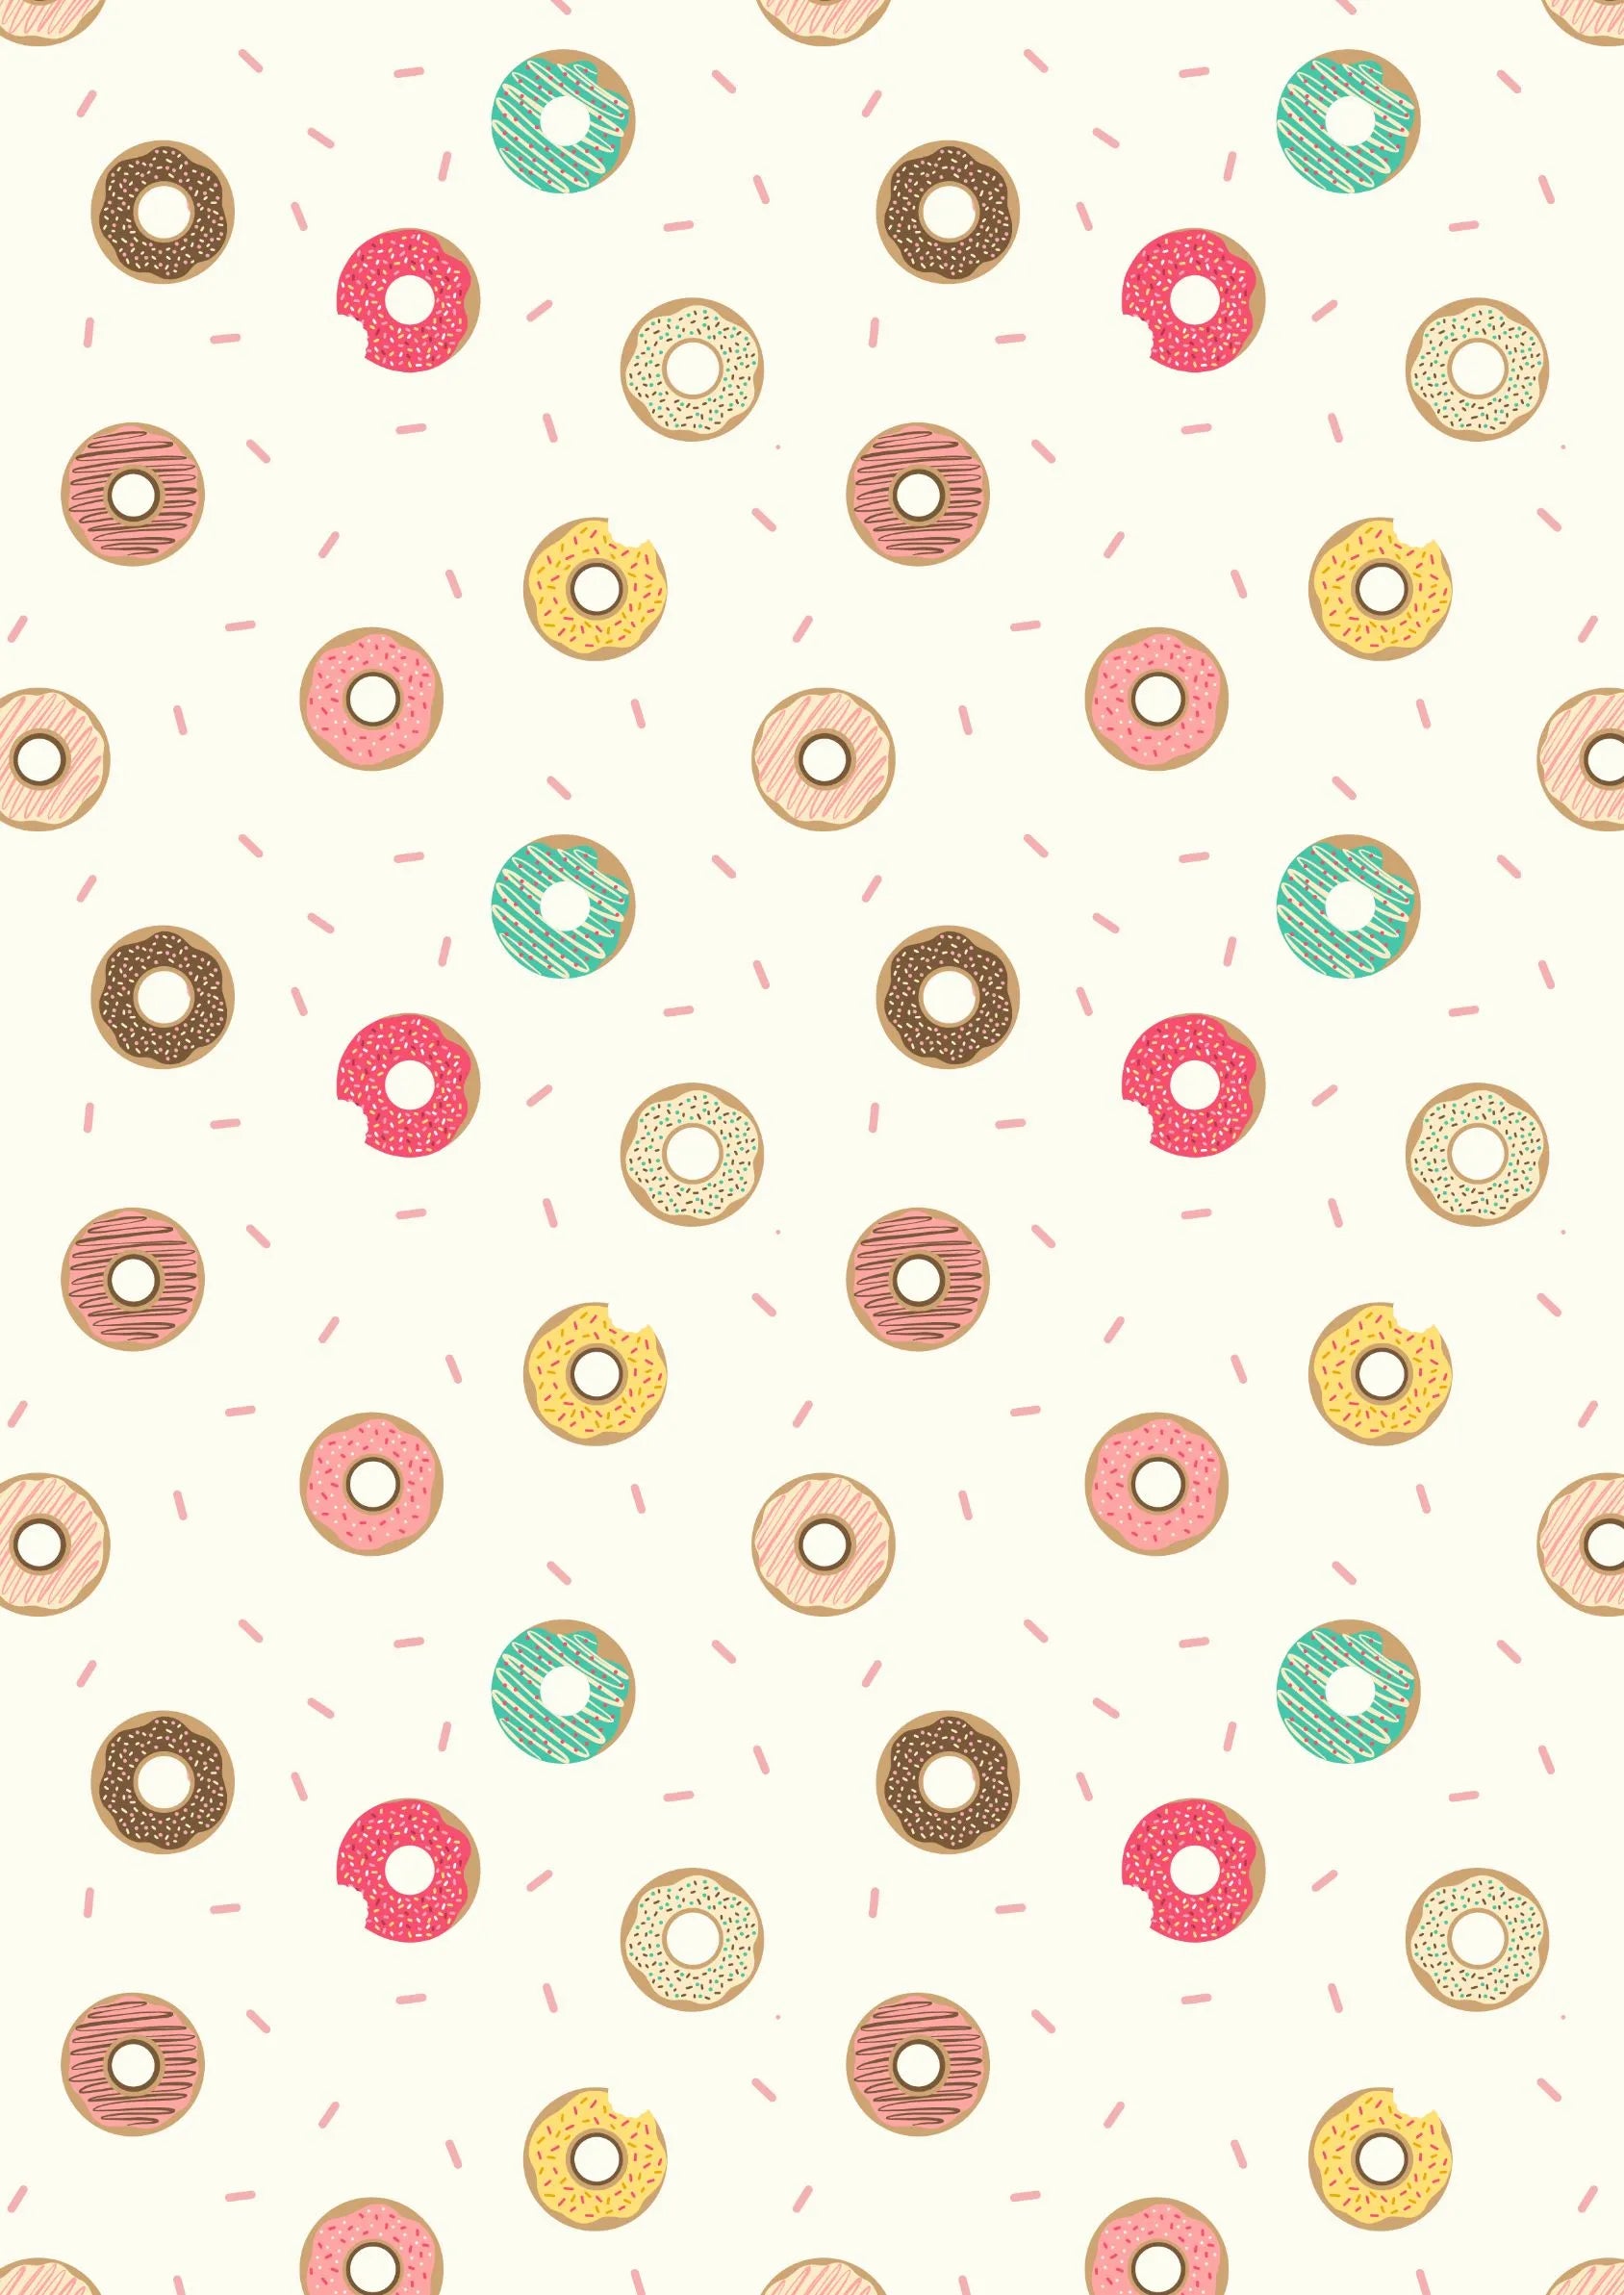 Doughnuts and Sprinkles On Cream - Weave & Woven